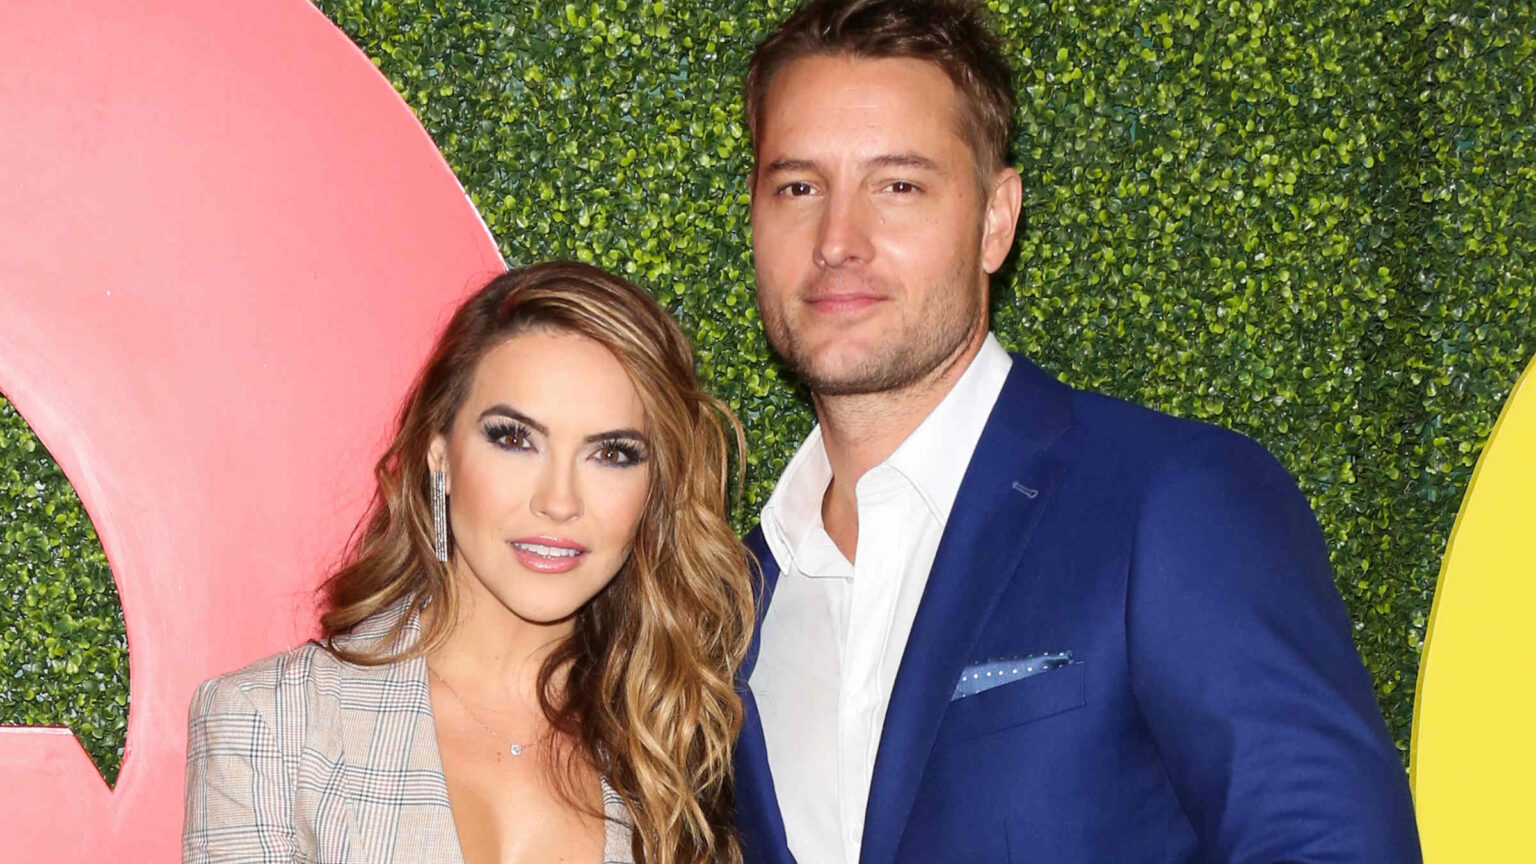 The divorce between Chrishell Stause of 'Selling Sunset' and Justin Hartley of 'This is Us' has surprised many, and wasn't mutual.